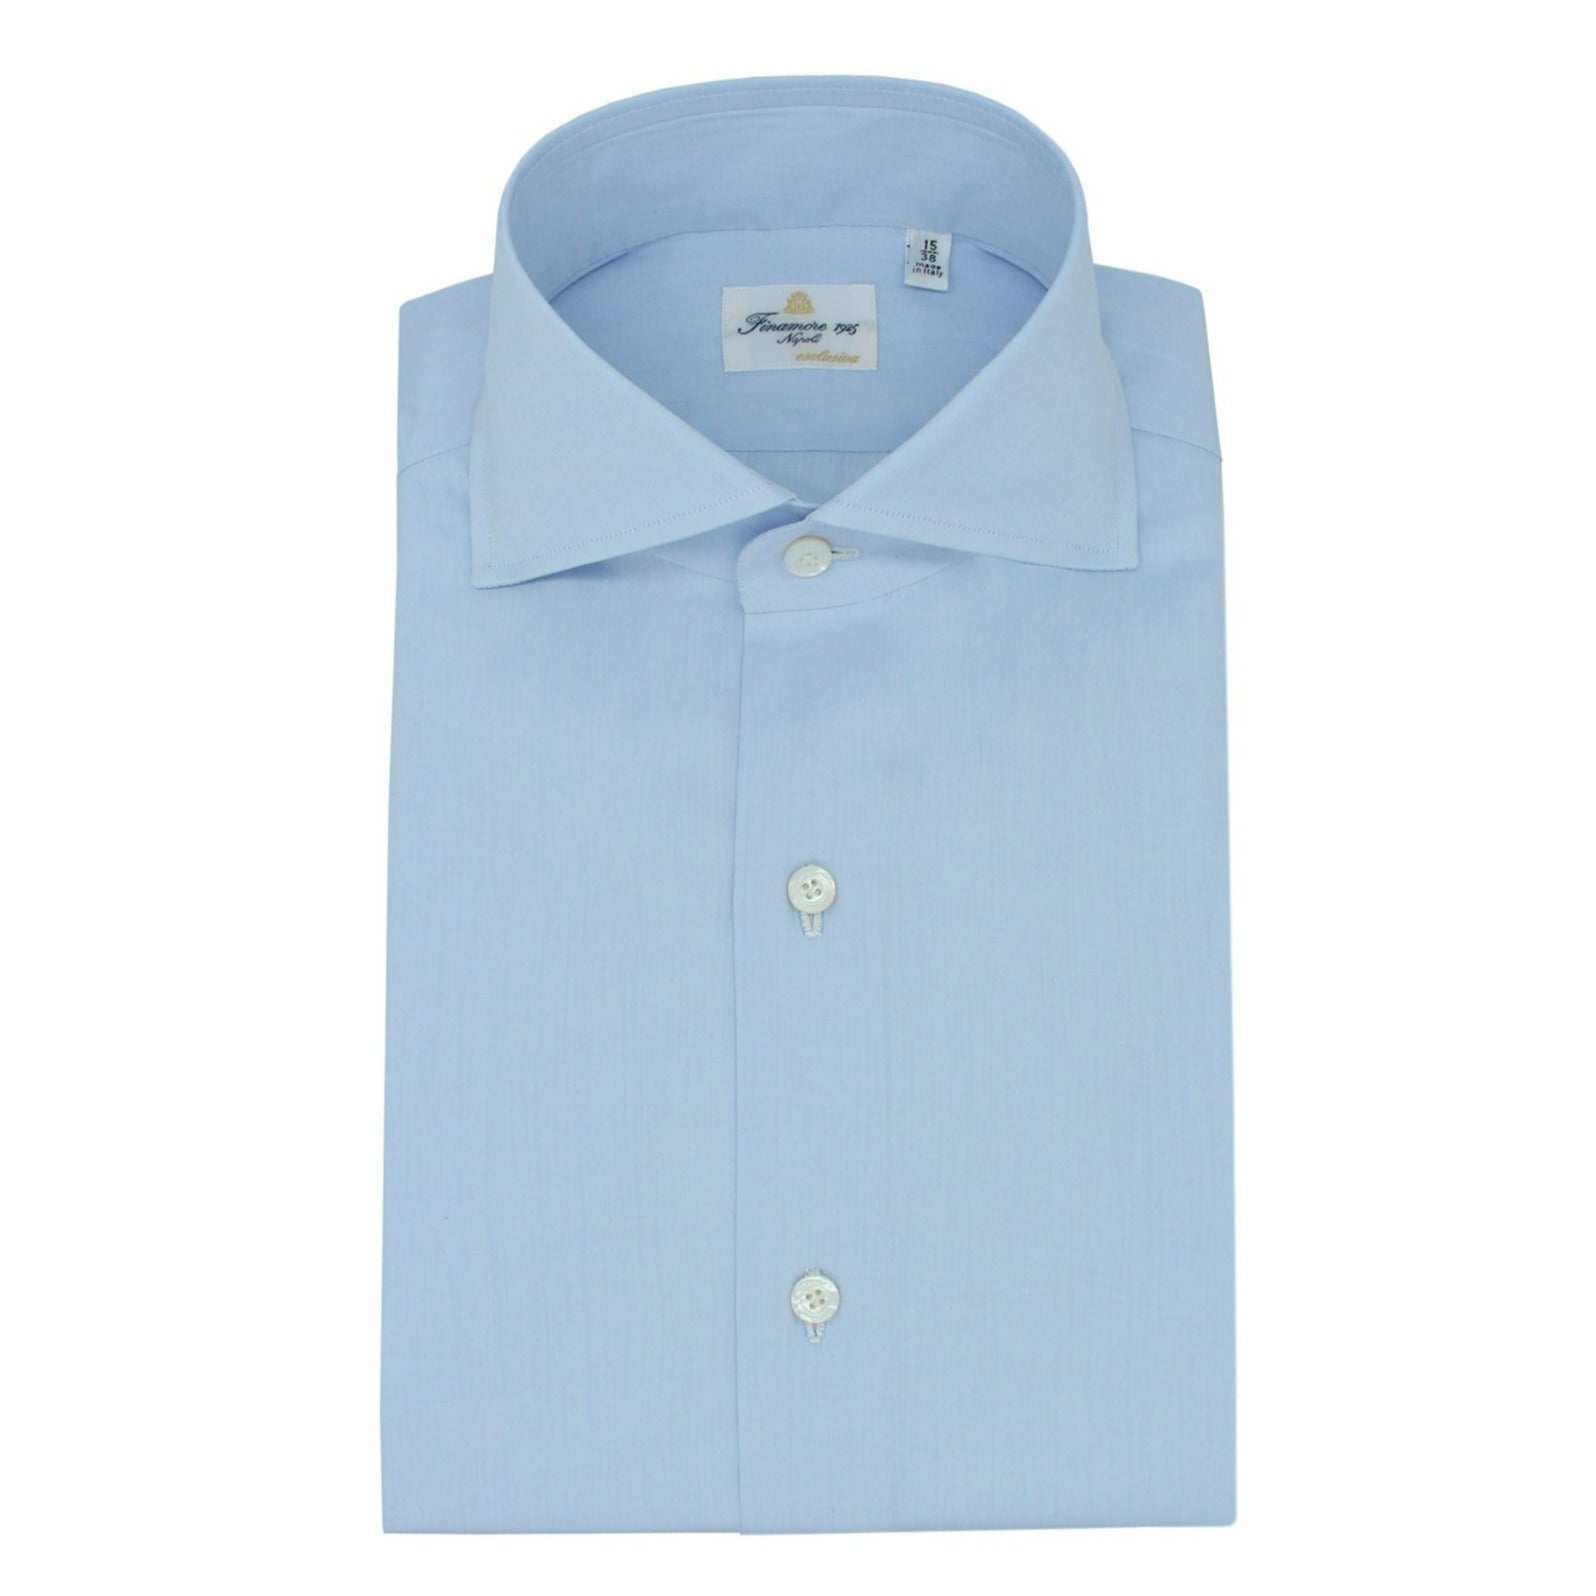 Esclusiva. Light blue shirt man classic completely sewn by hand